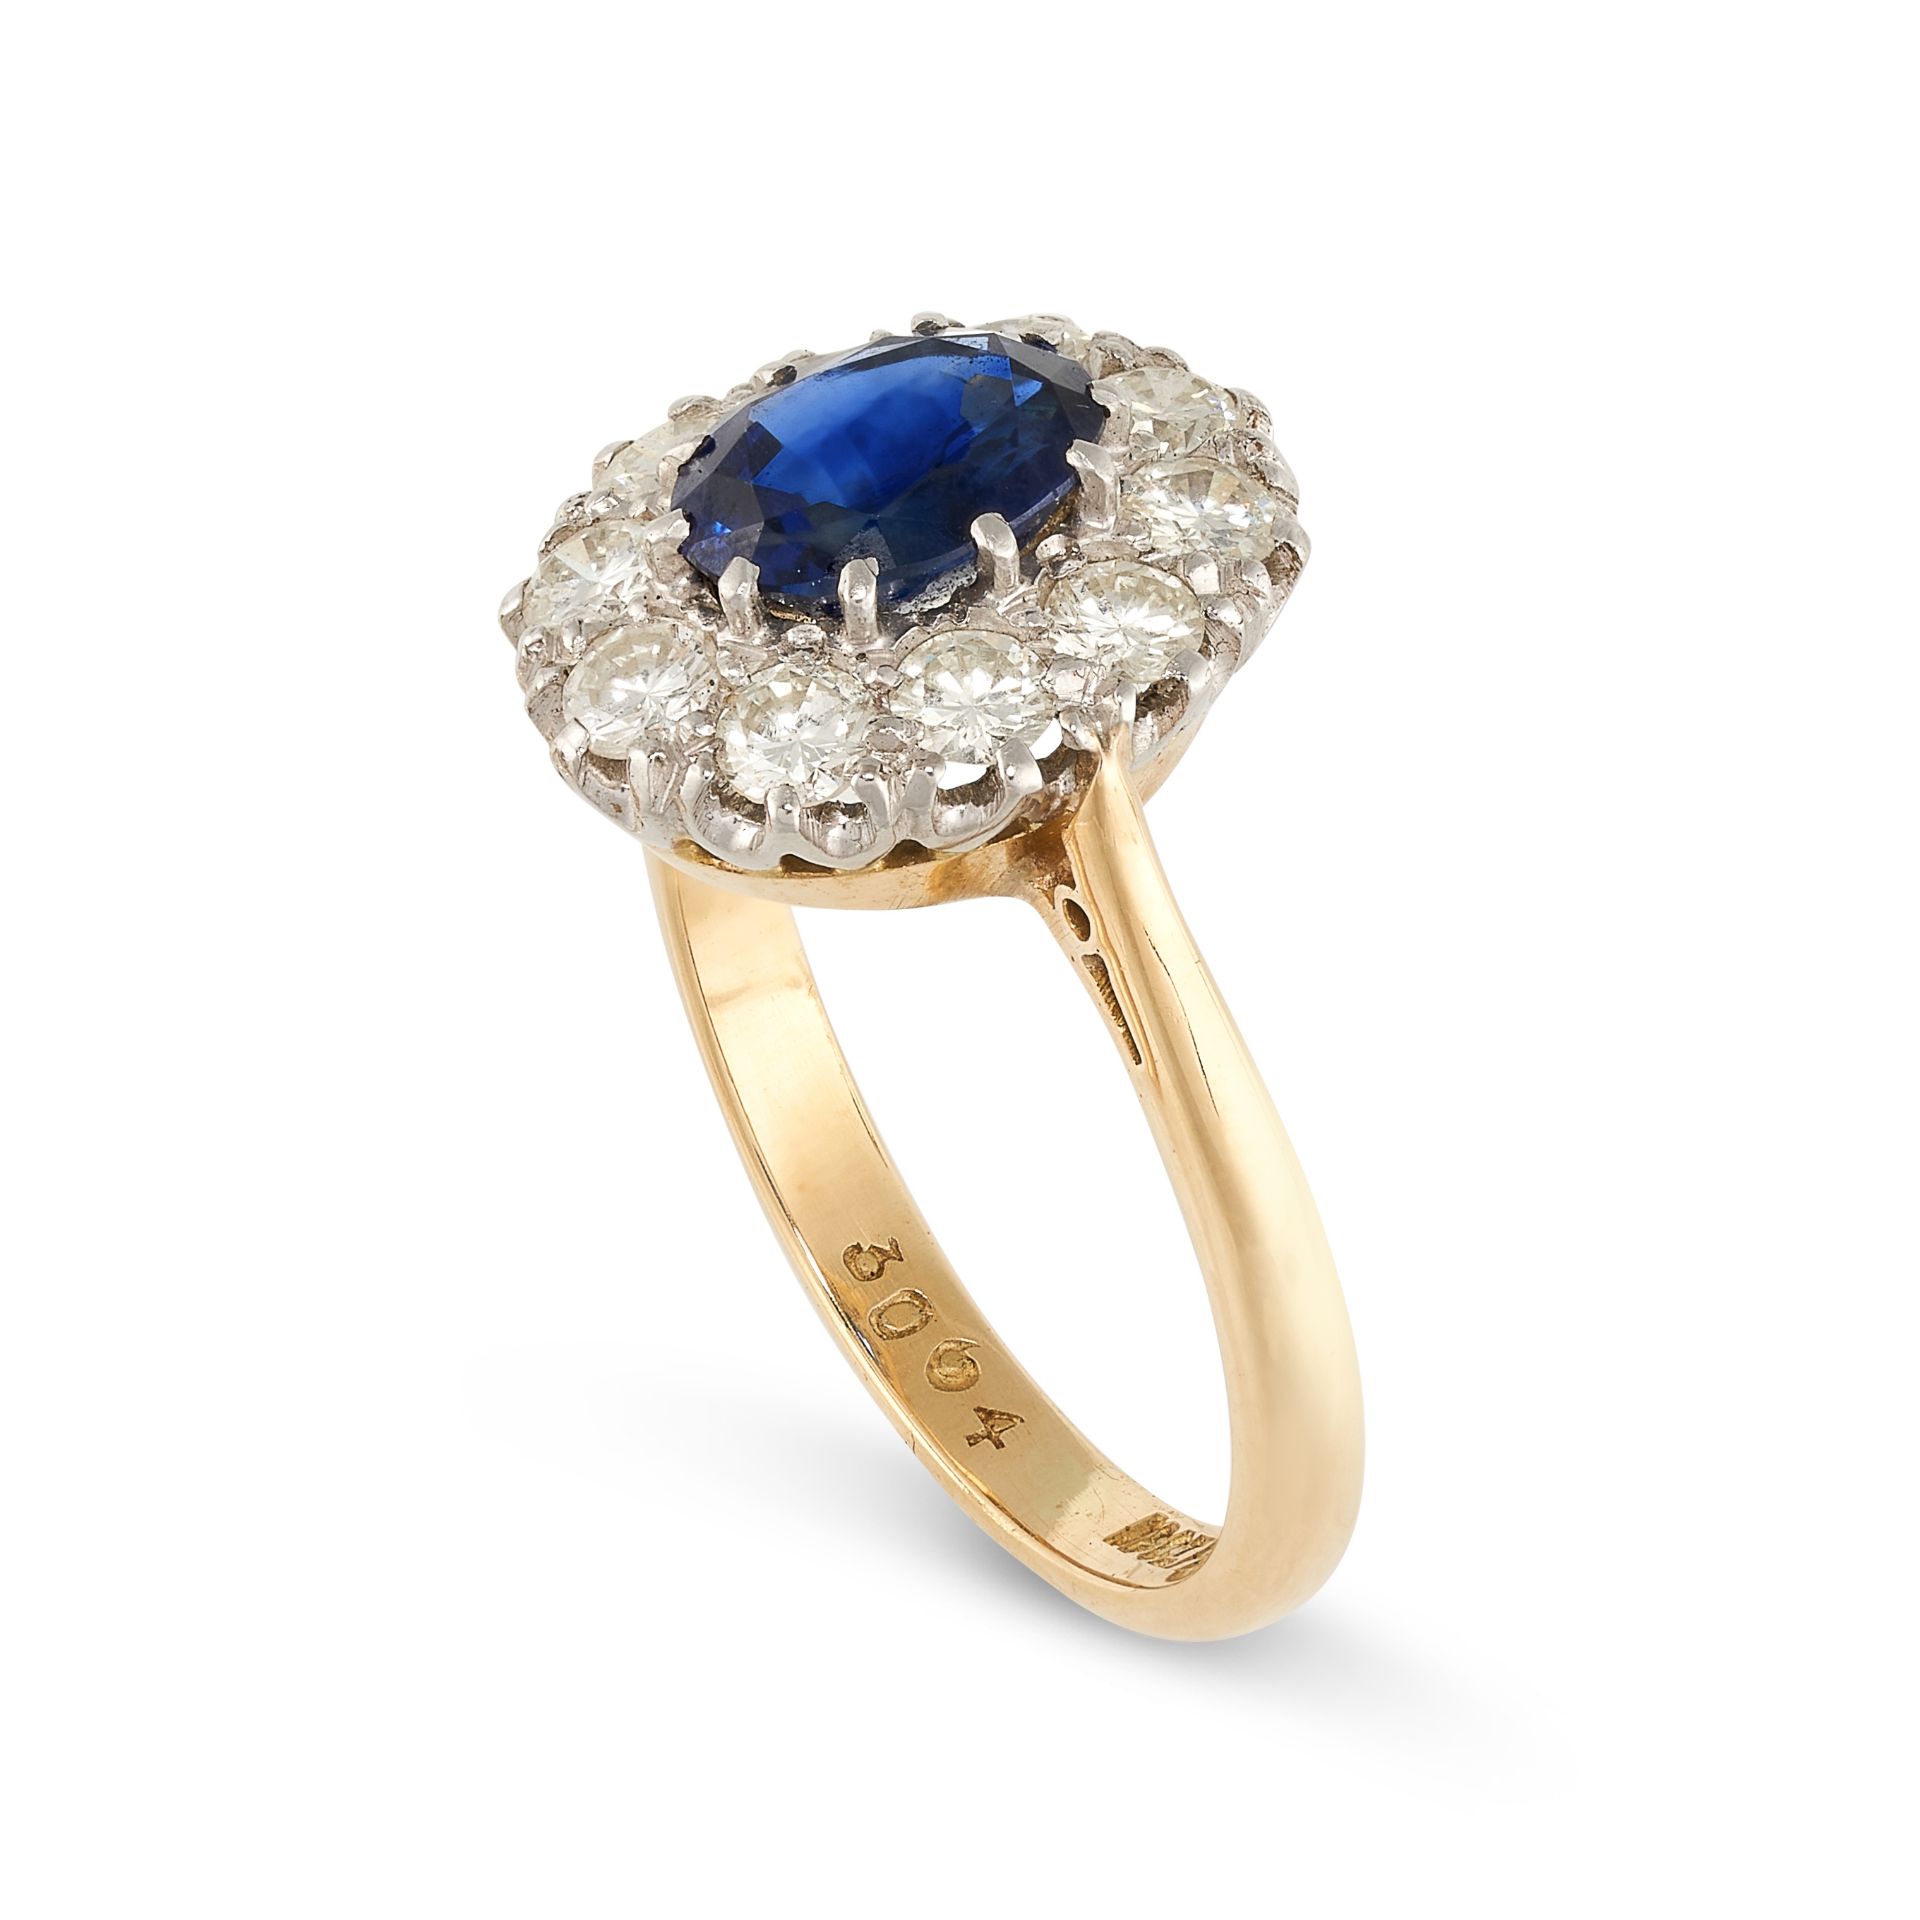 NO RESERVE - A VINTAGE SAPPHIRE AND DIAMOND DRESS RING in 18ct yellow gold and platinum, set with an - Image 2 of 2